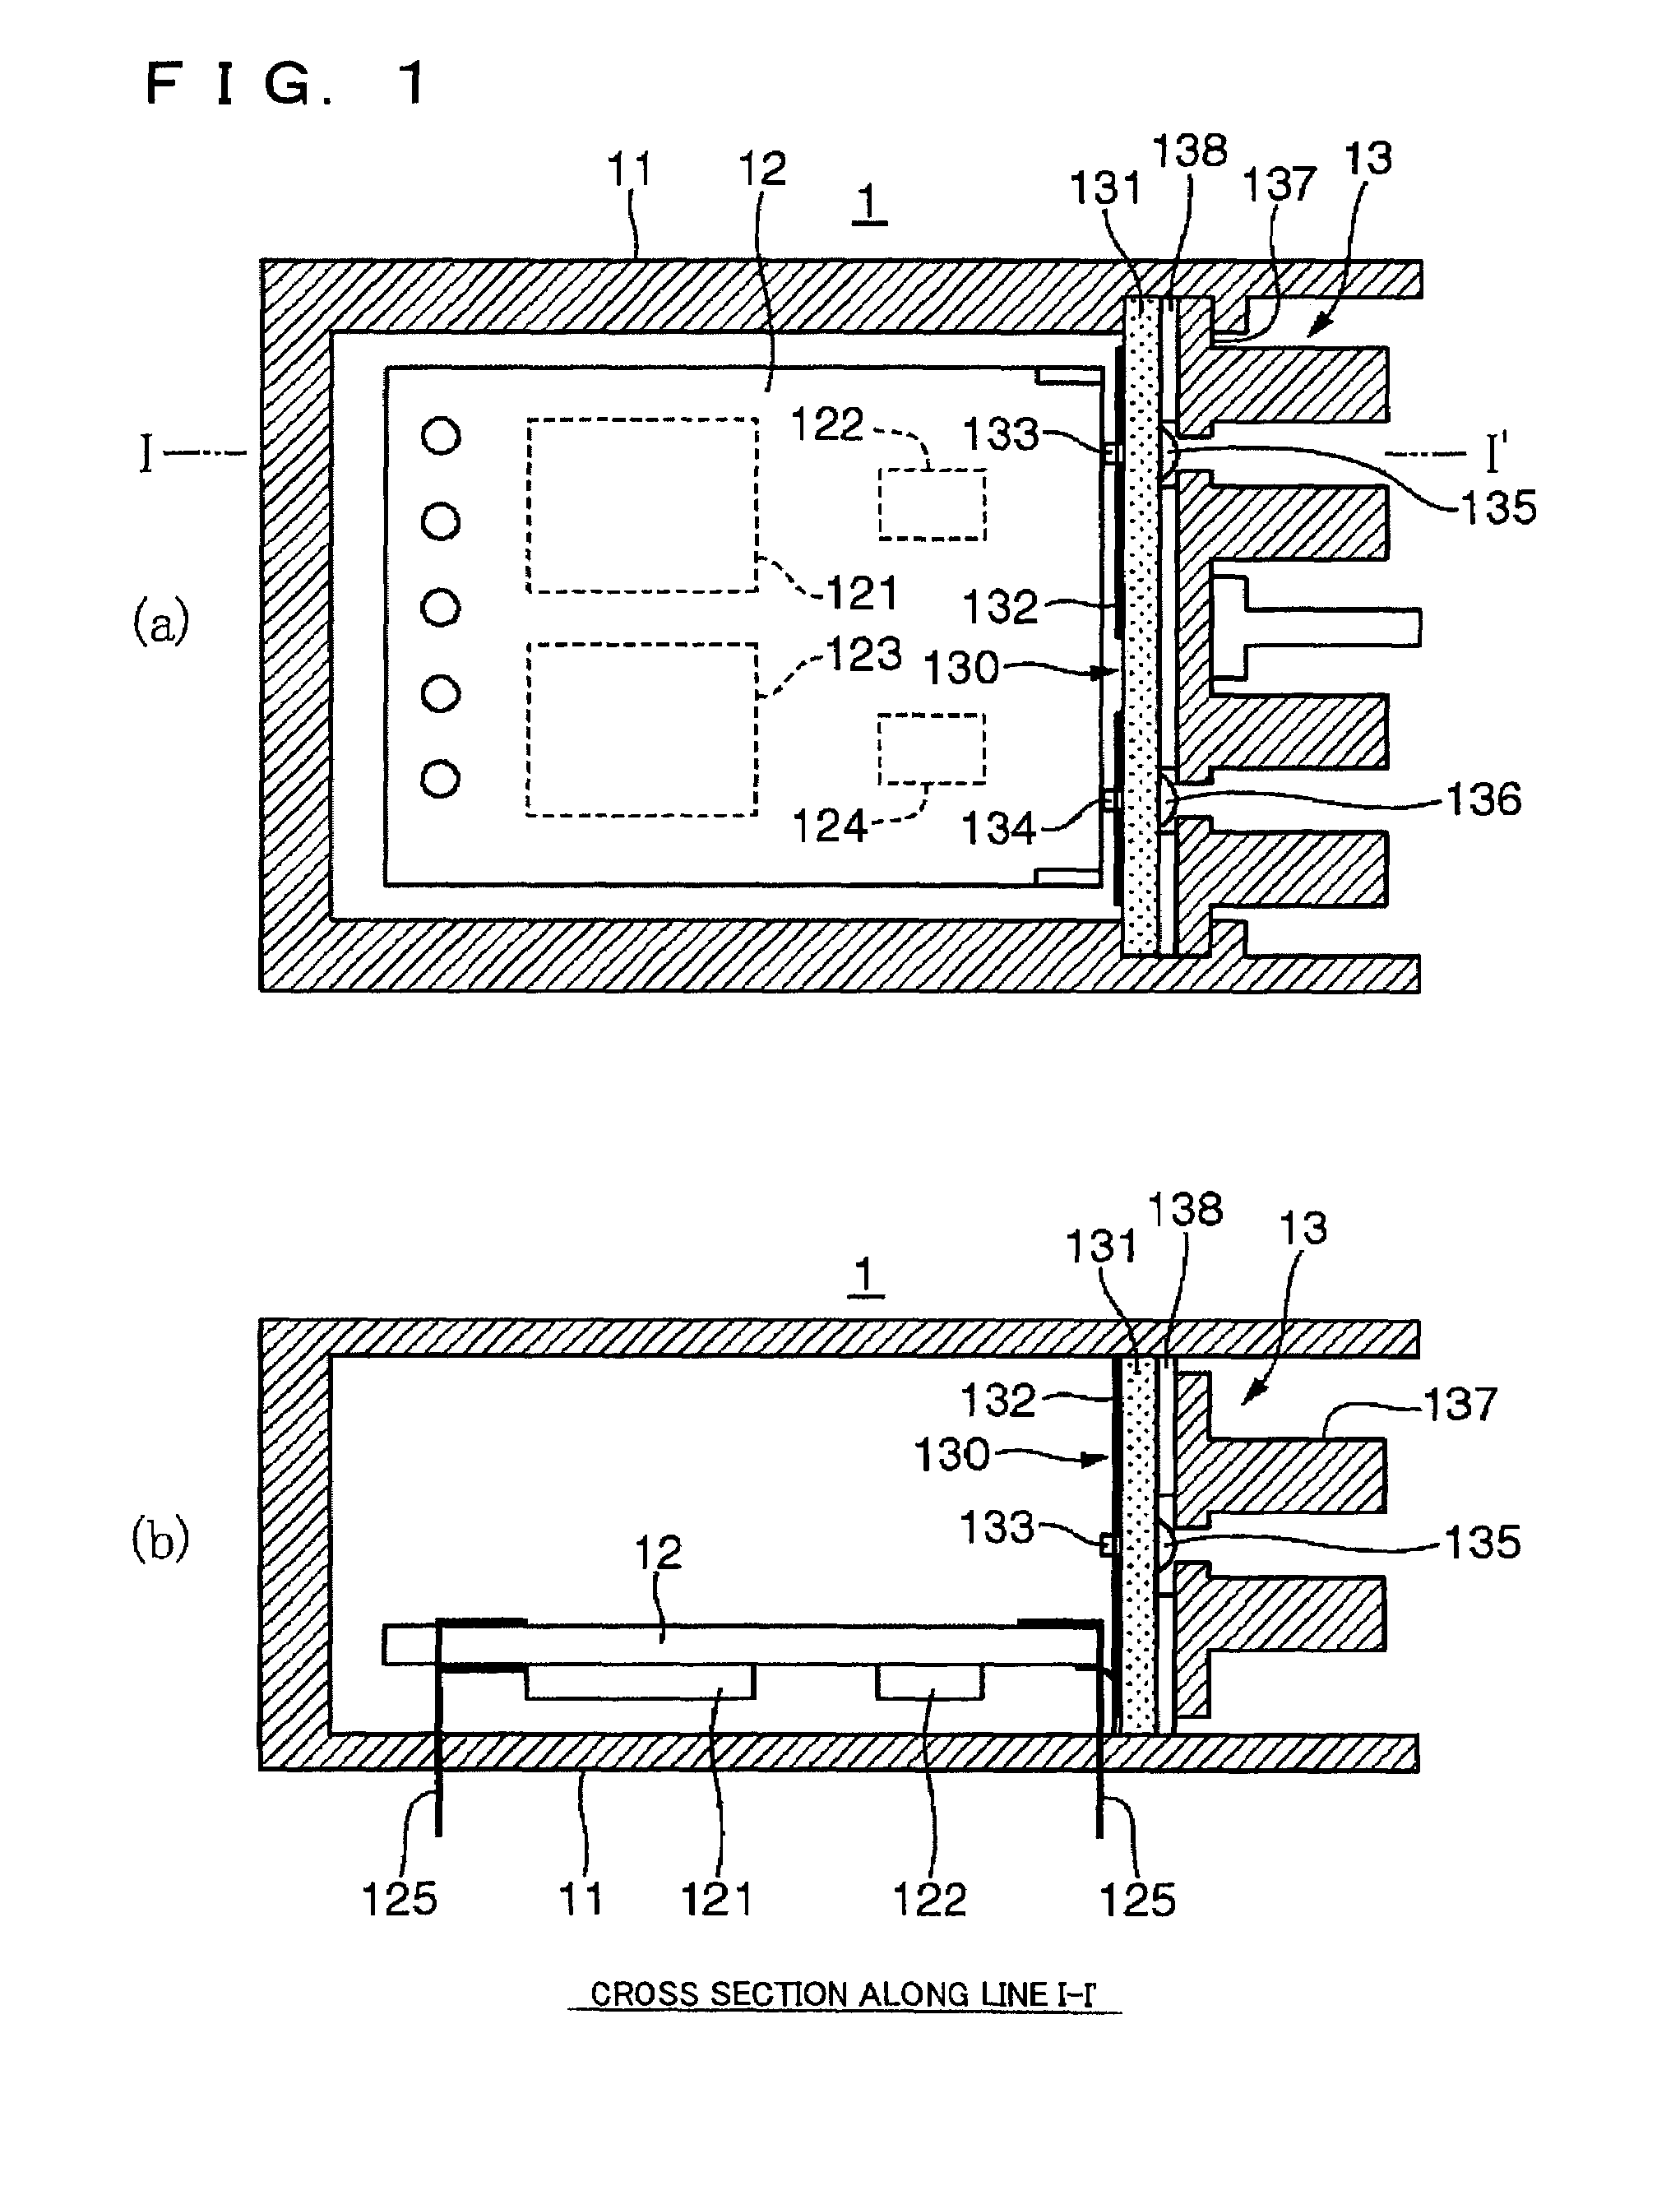 Optical transceiver and method for producing the same